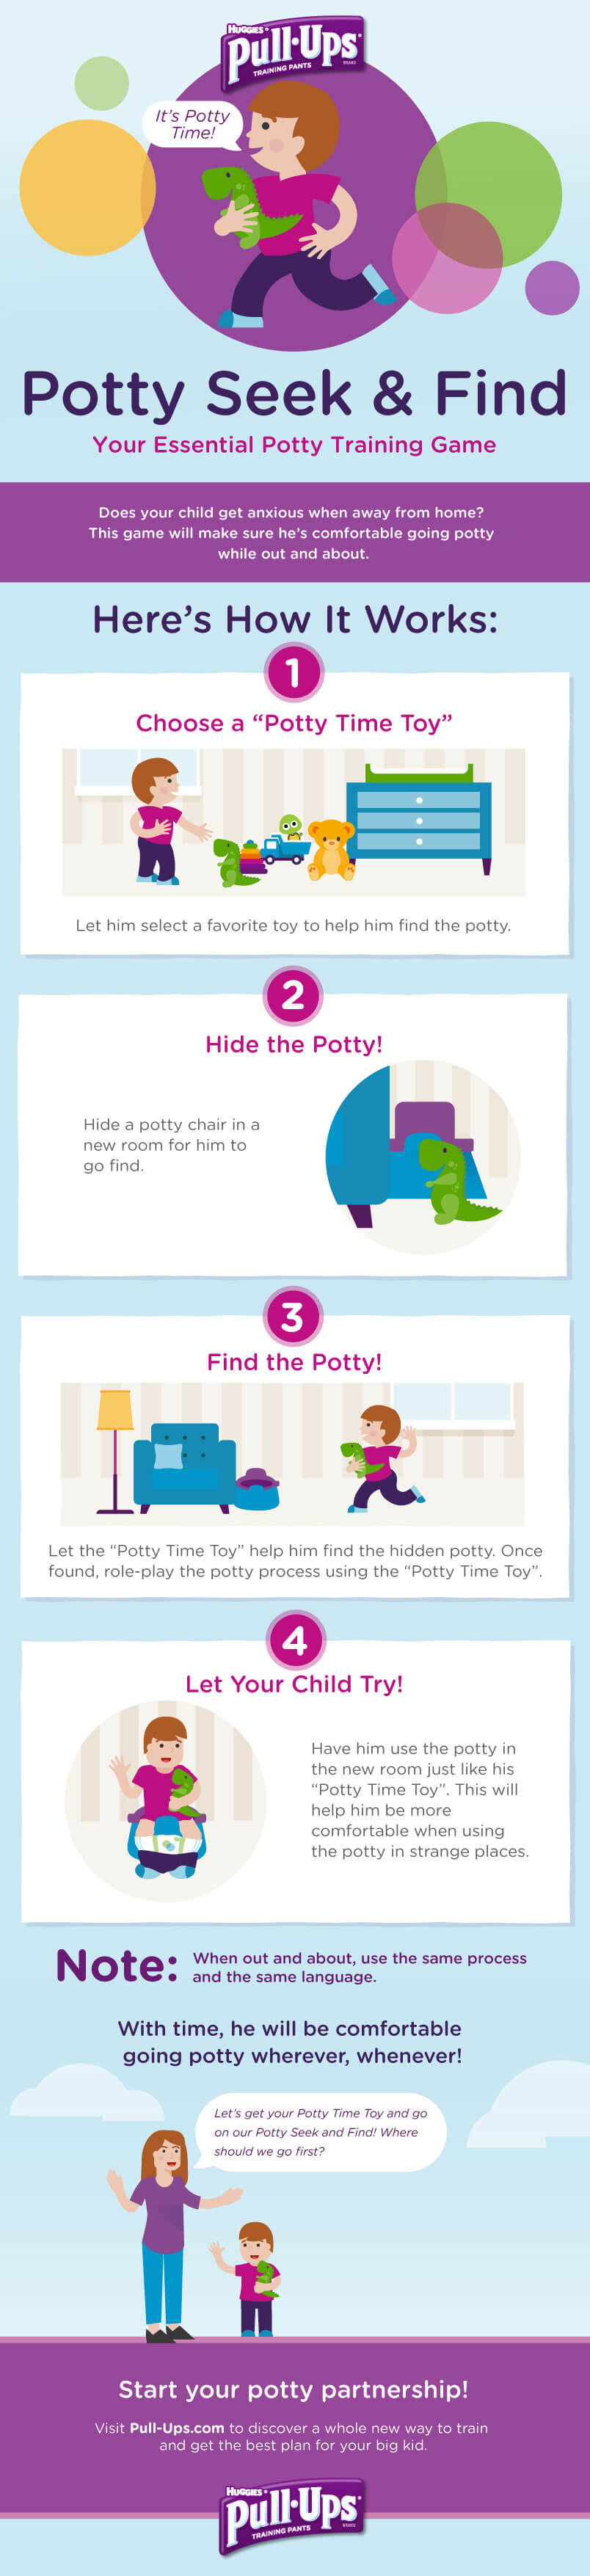 Infographic showing the step-by-step instructions for the Potty Seek and Find game